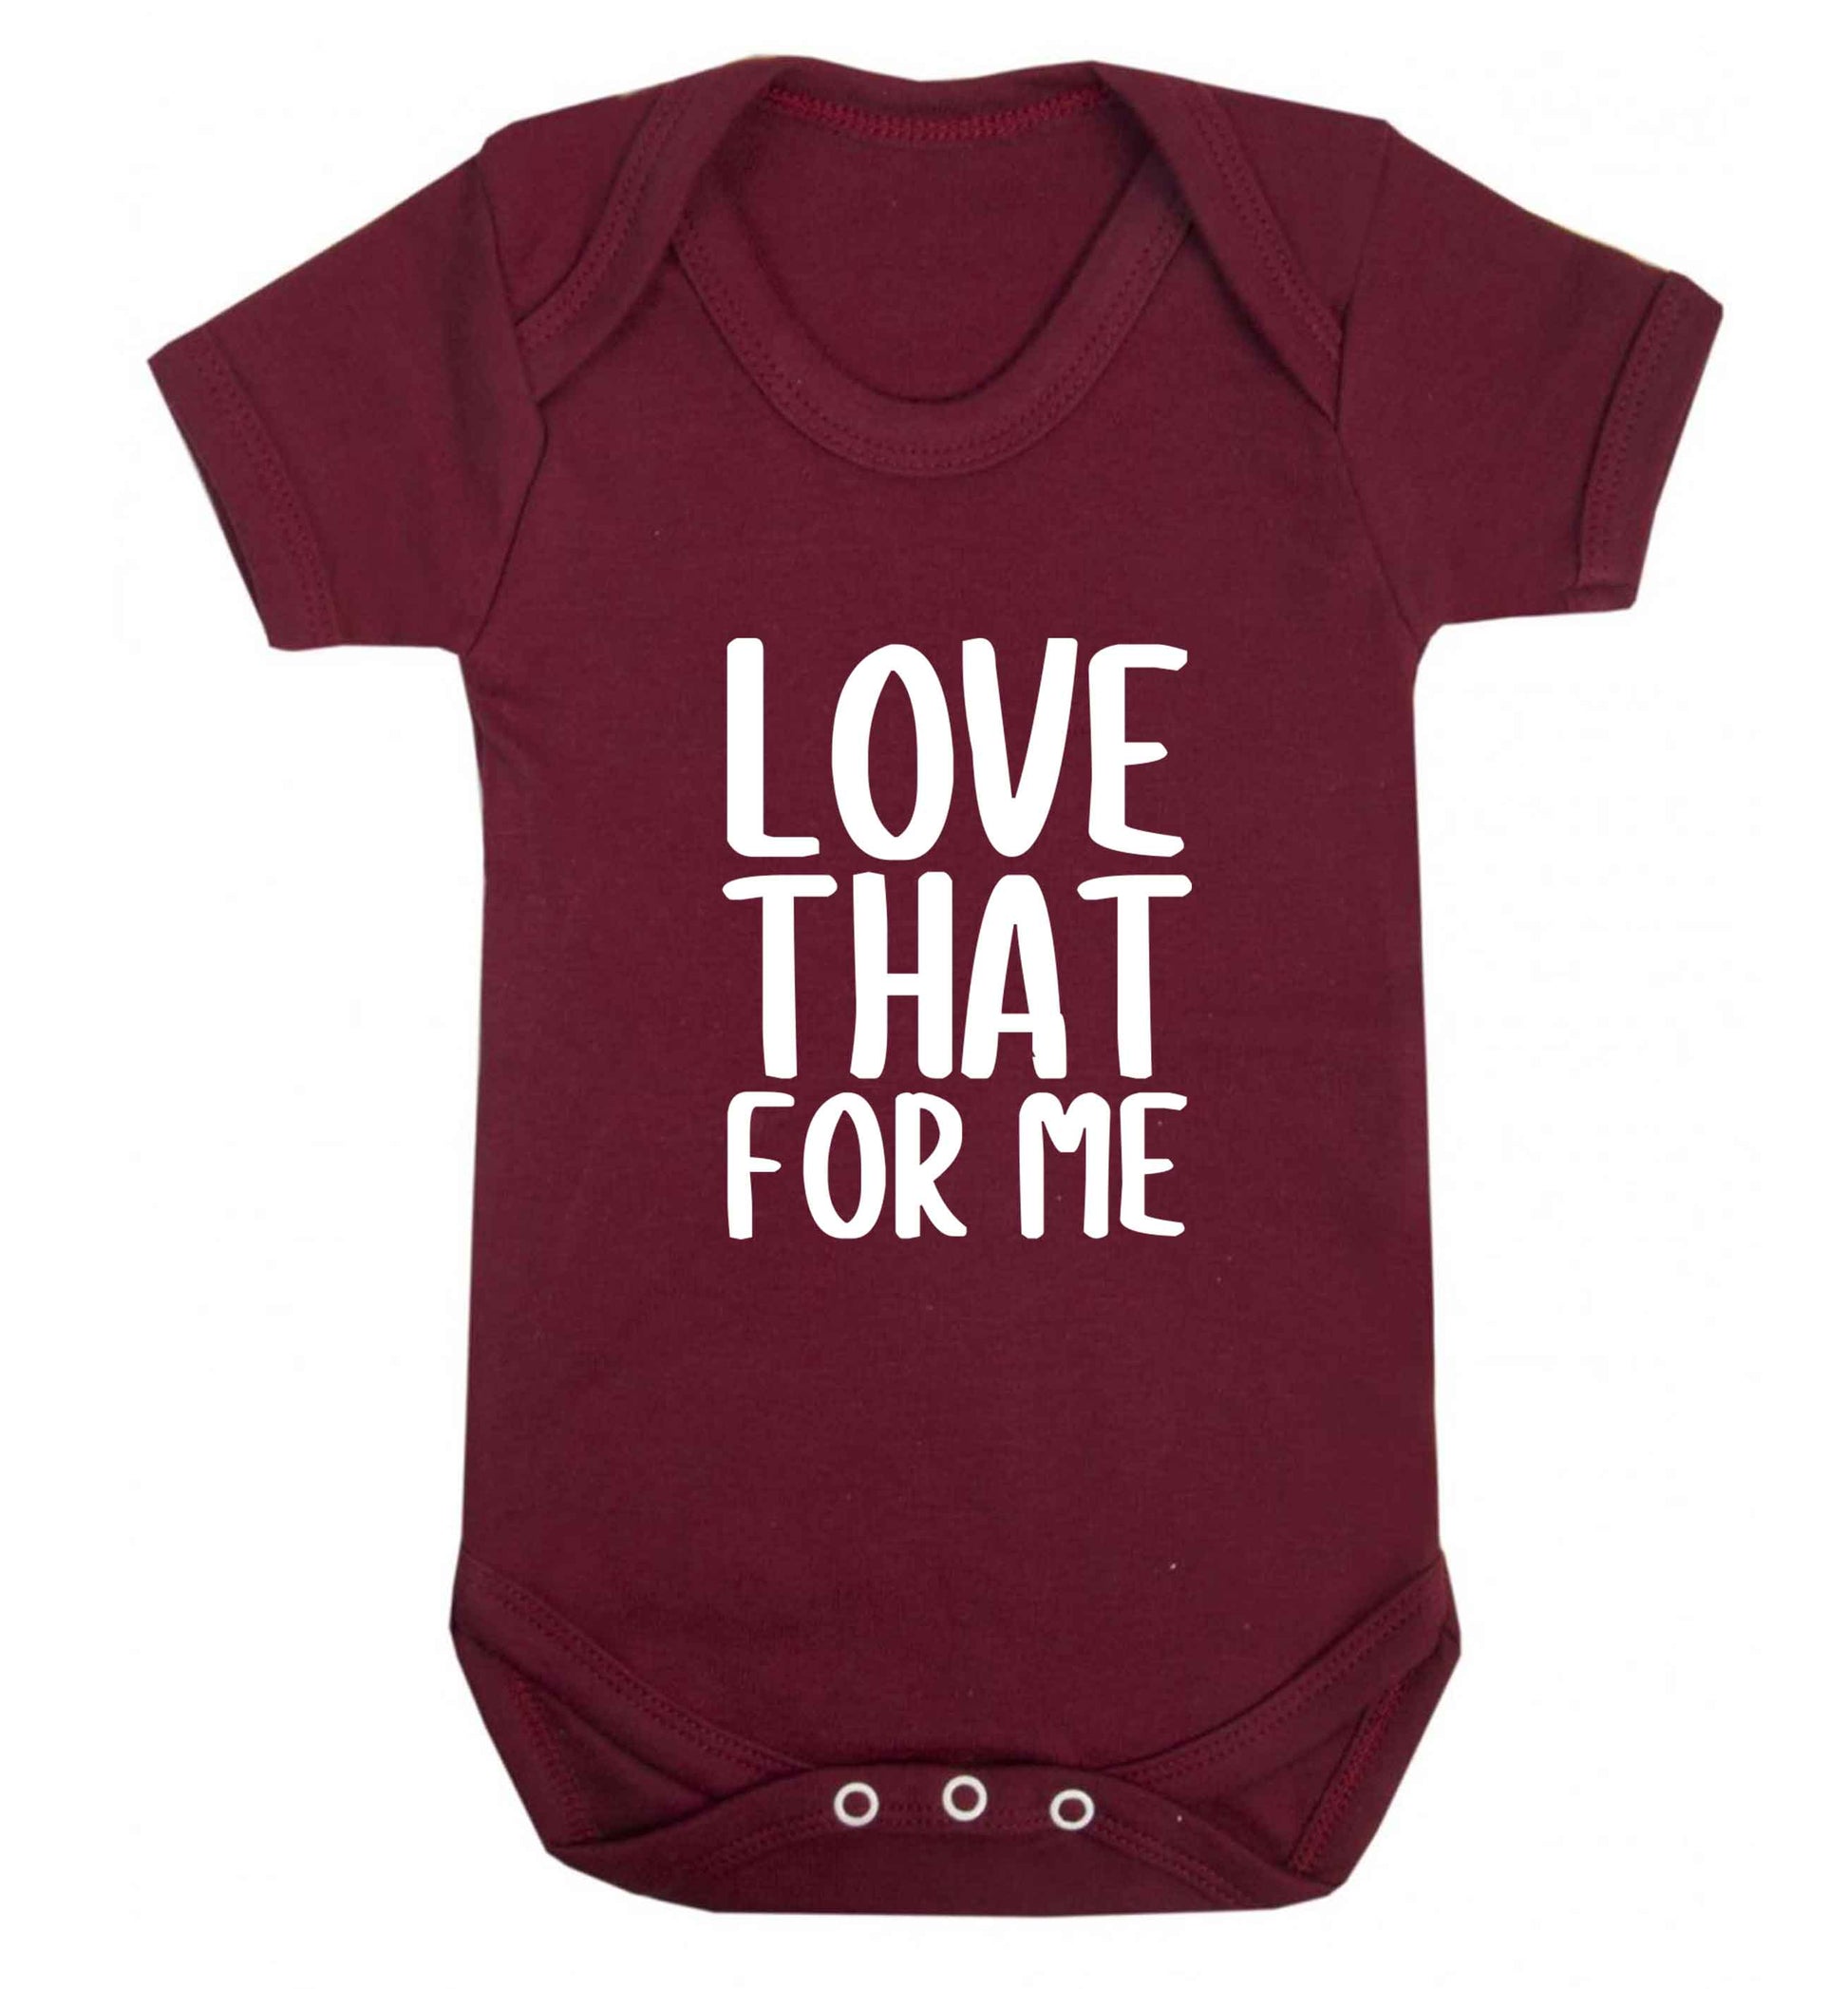 We love this for YOU! Who else loves saying this?!  baby vest maroon 18-24 months